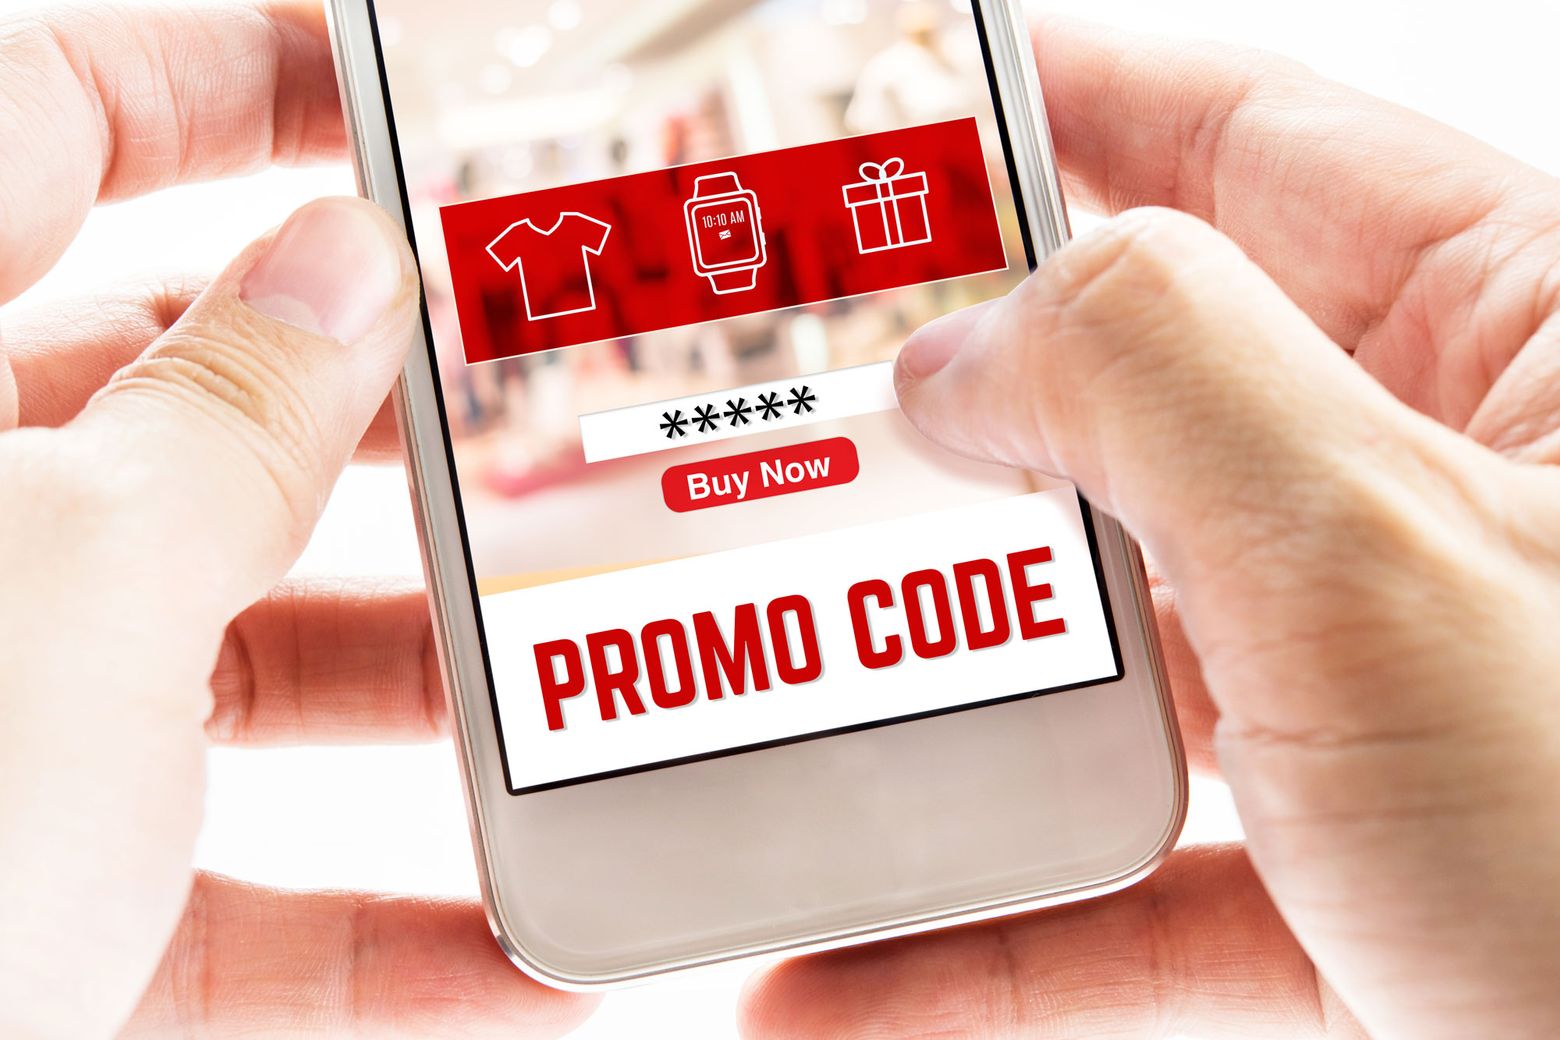 Strategies To Find Online Promo Codes That Actually Work The